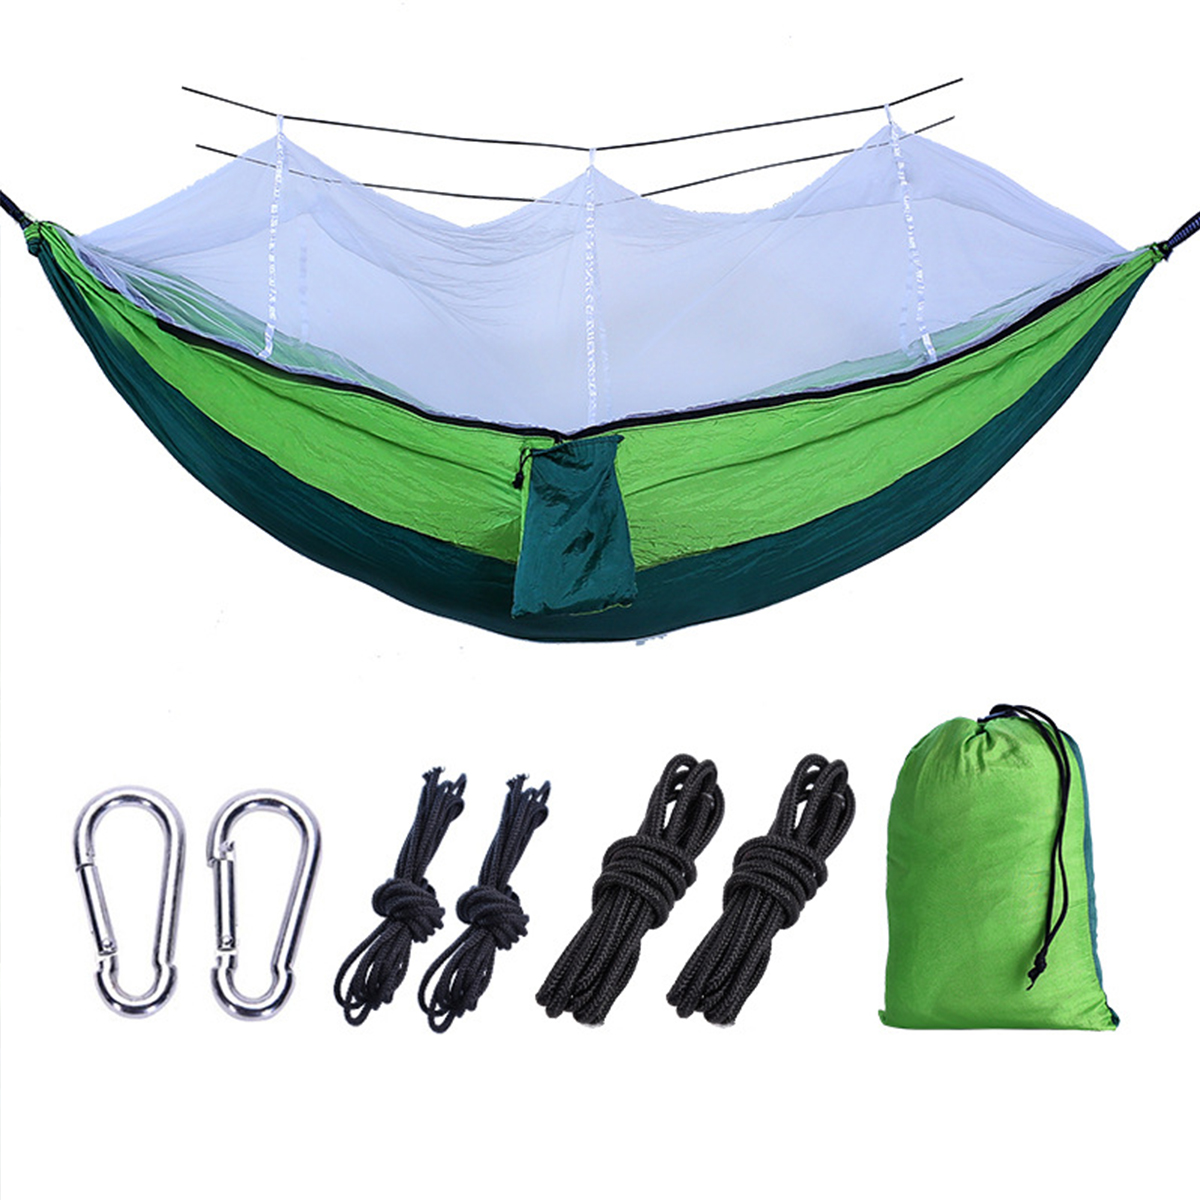 IPReereg-260140CM-With-Mosquito-Net-Portable-Travel-Hammock-Comfortable-Hommock-Camping-Bed-Fits-2-P-1726267-10